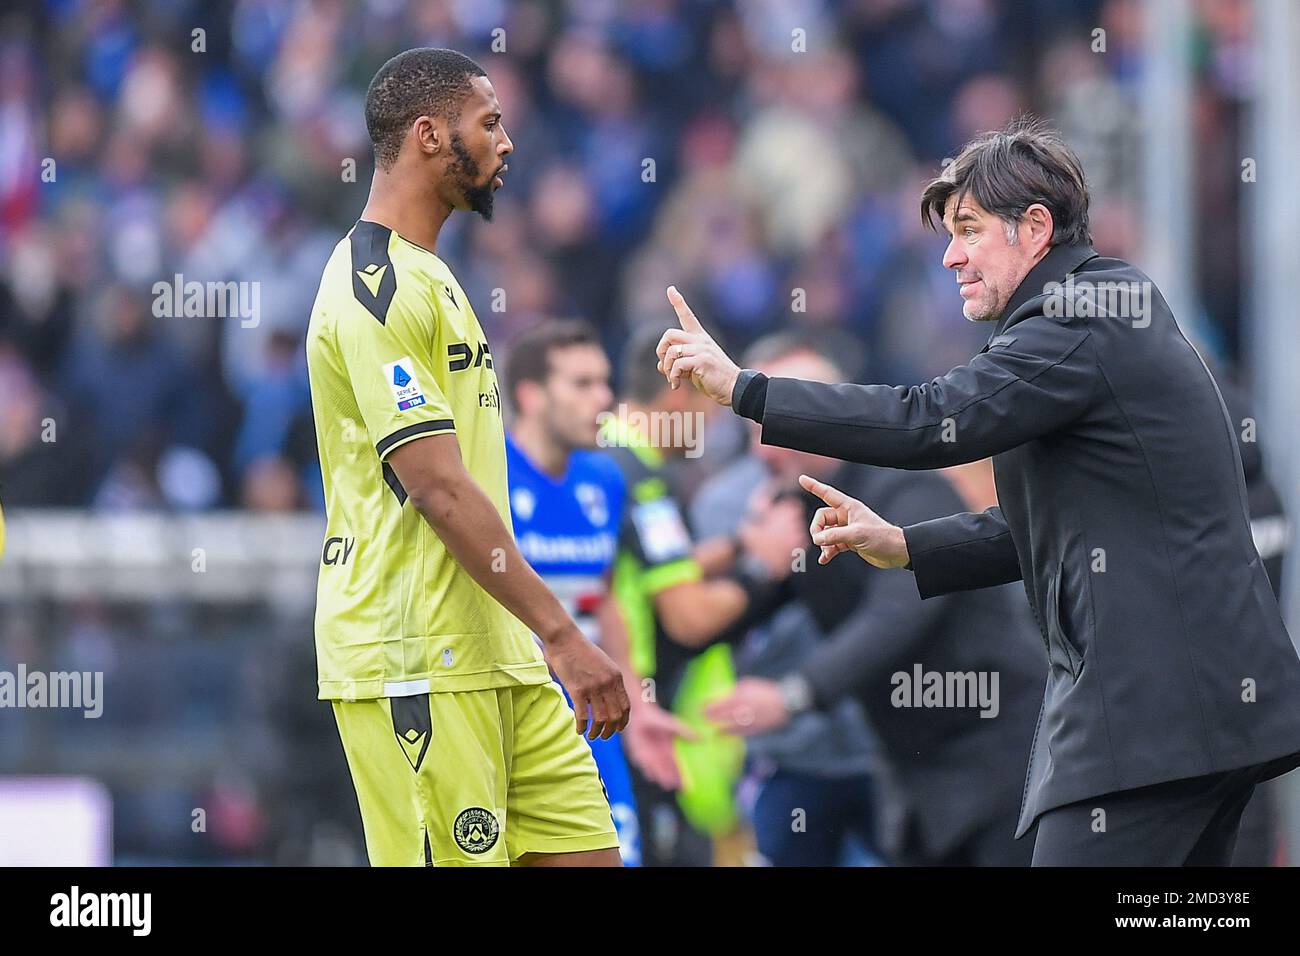 Genova, Italy. 22nd Jan, 2023. Norberto Bercique Gomes Betuncal, detto Beto (Udinese) - Andrea Sottil (Udinese) head coach during UC Sampdoria vs Udinese Calcio, italian soccer Serie A match in Genova, Italy, January 22 2023 Credit: Independent Photo Agency/Alamy Live News Stock Photo